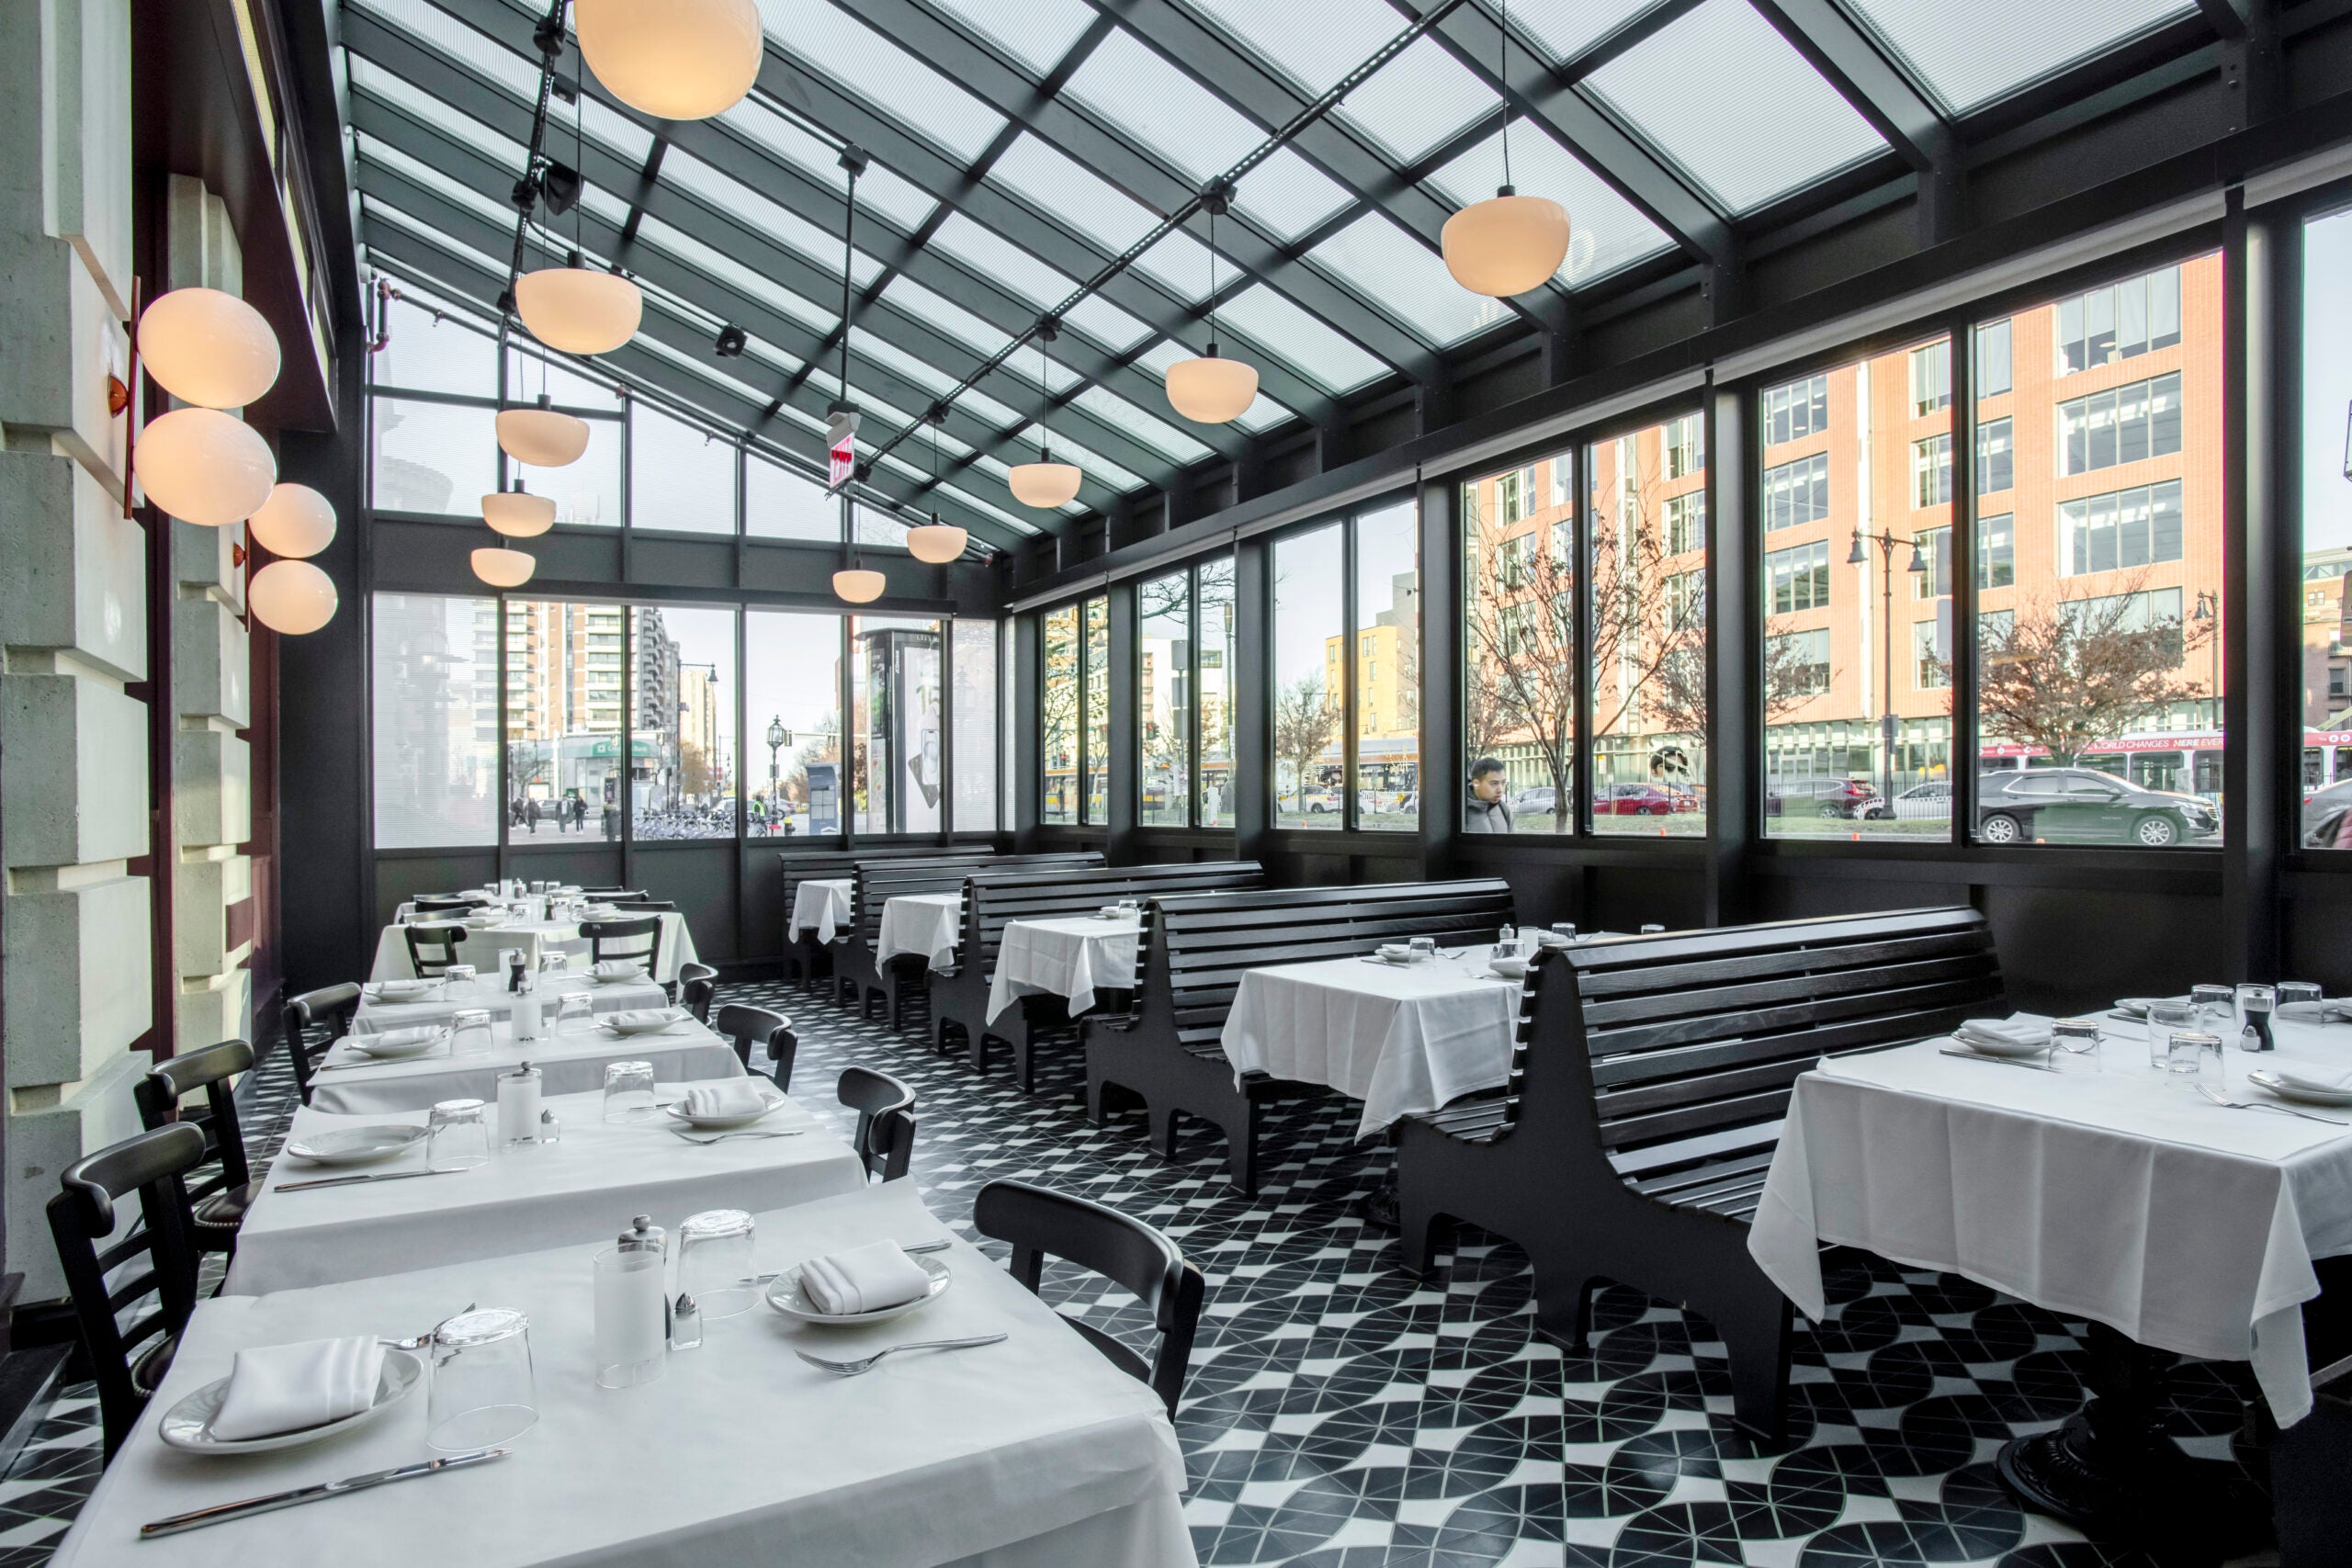 Blue Ribbon Brasserie brings late-night dining to Boston